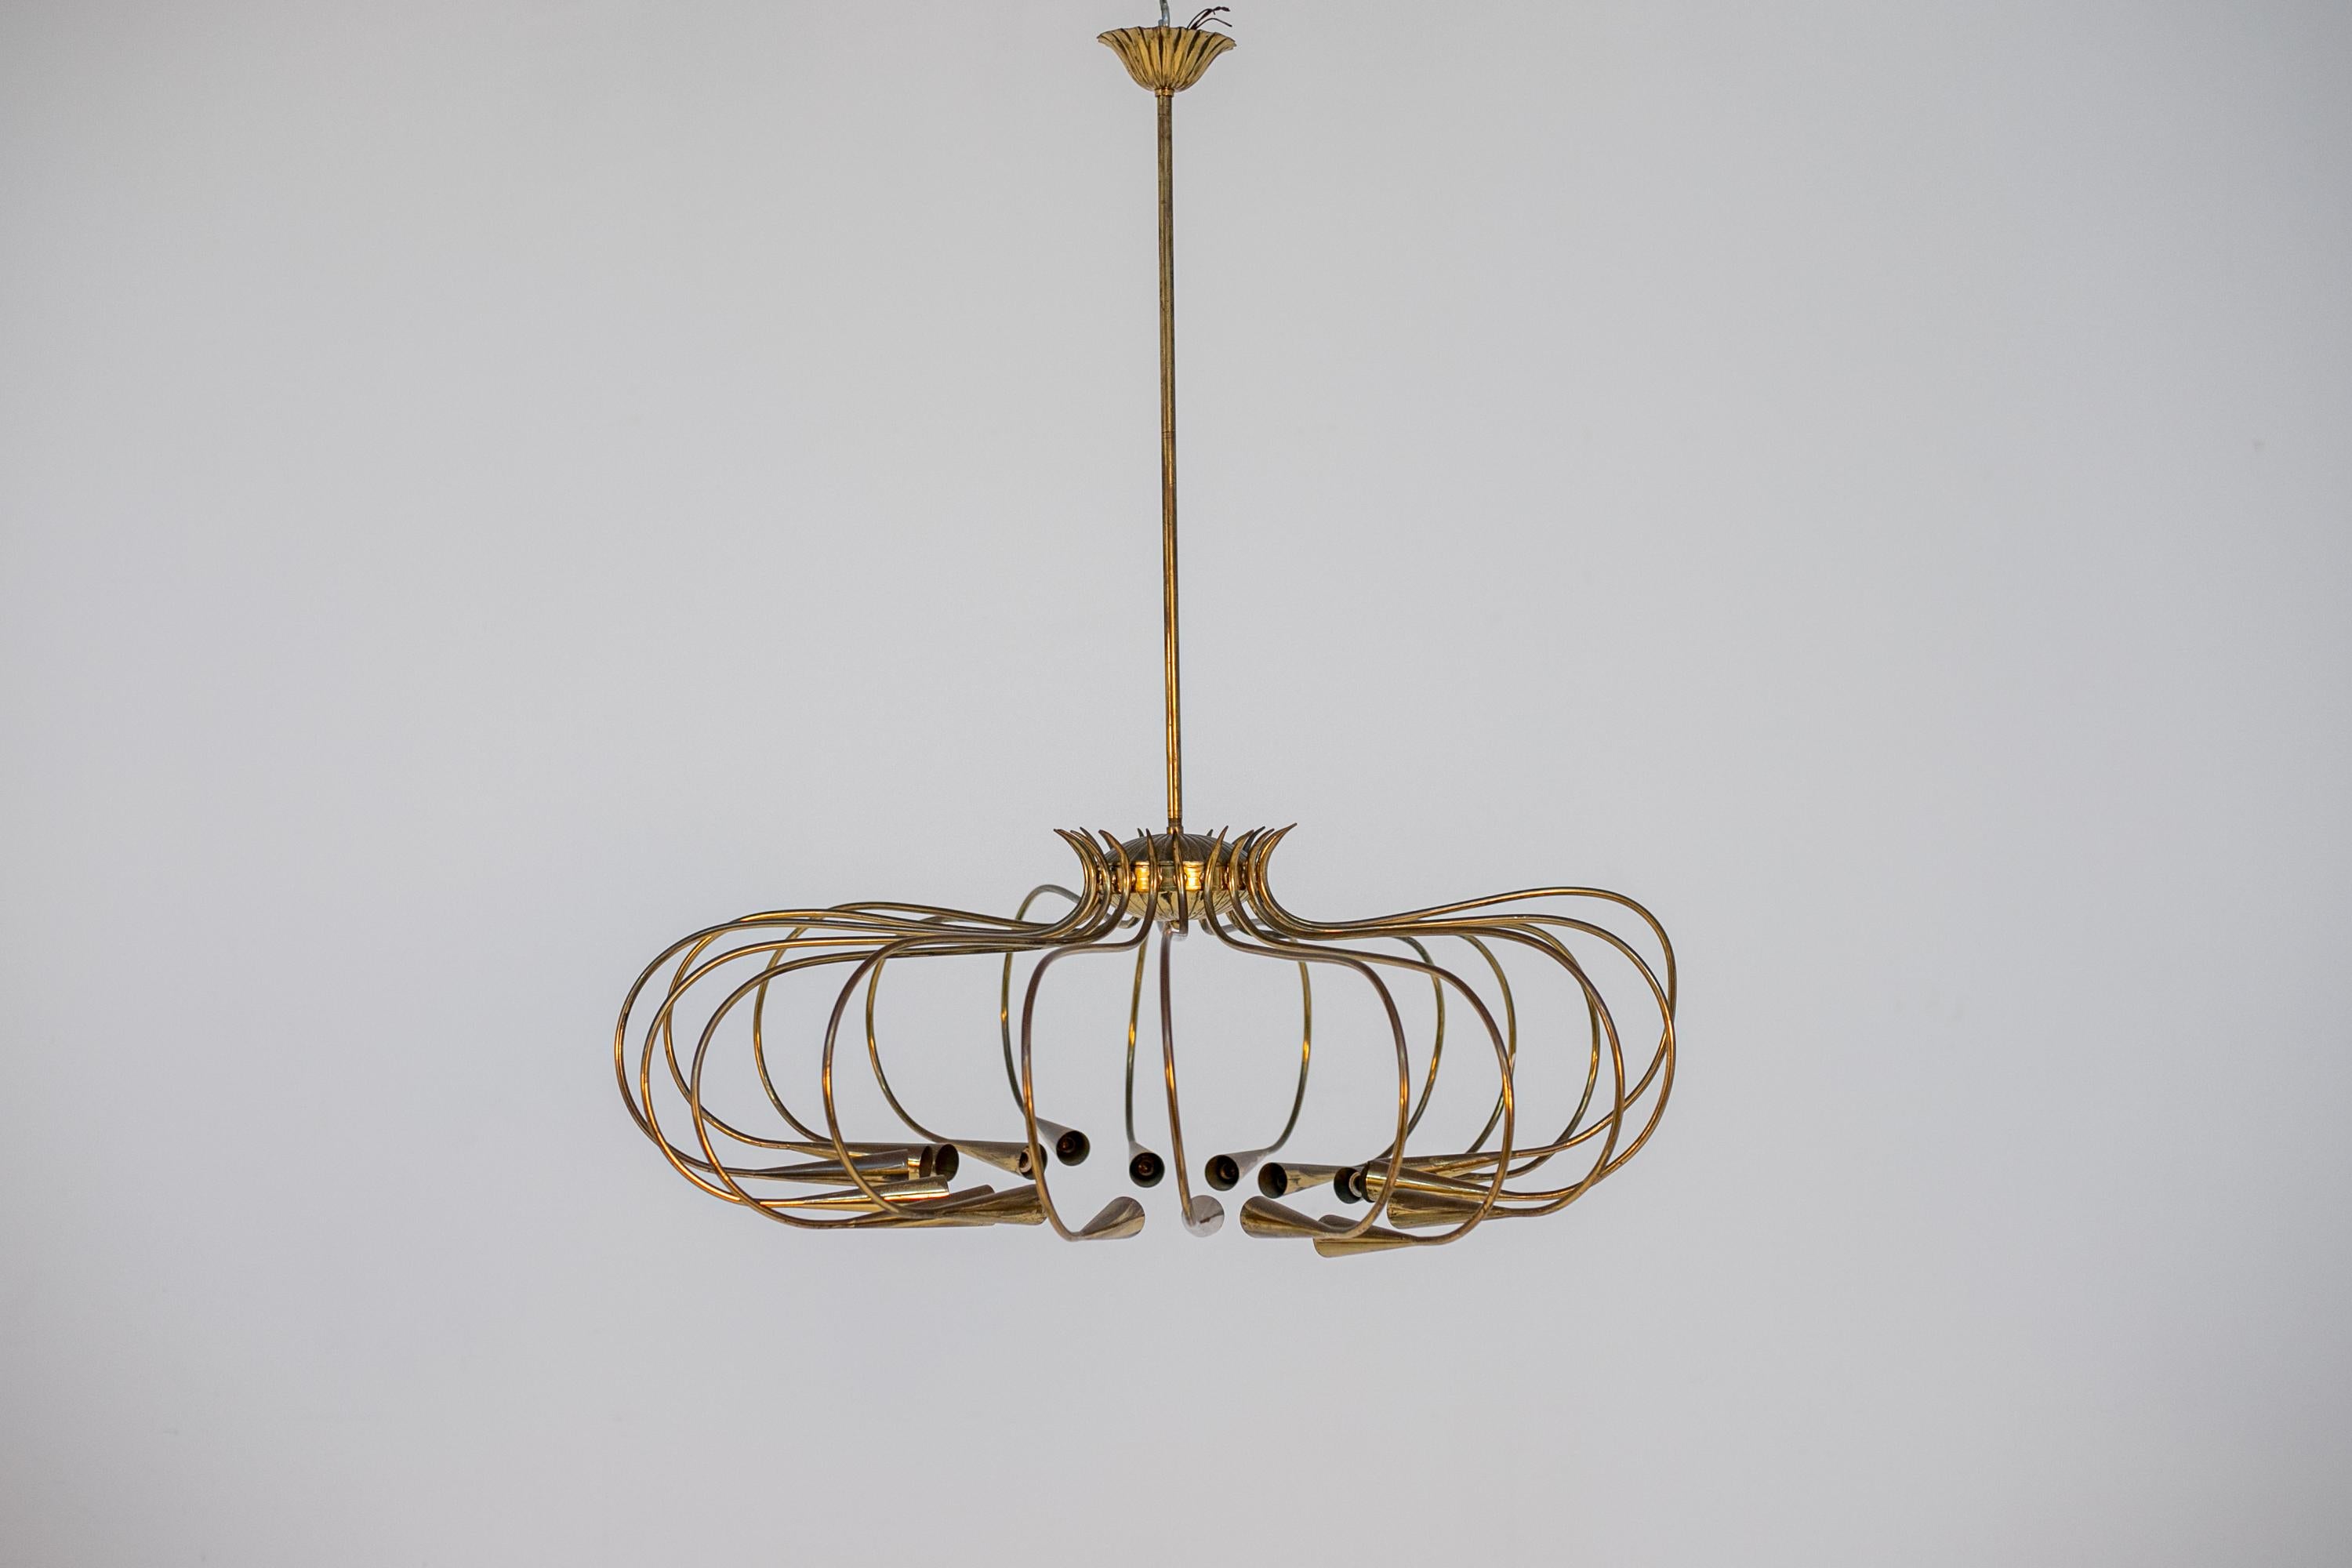 Large Italian chandelier from the 1950s by Oscar Torlasco for the Lumi manufactory. The chandelier is made entirely of brass. The chandelier is composed of seventeen arms made of brass stem. At the end of each brass stem there is a brass bulb